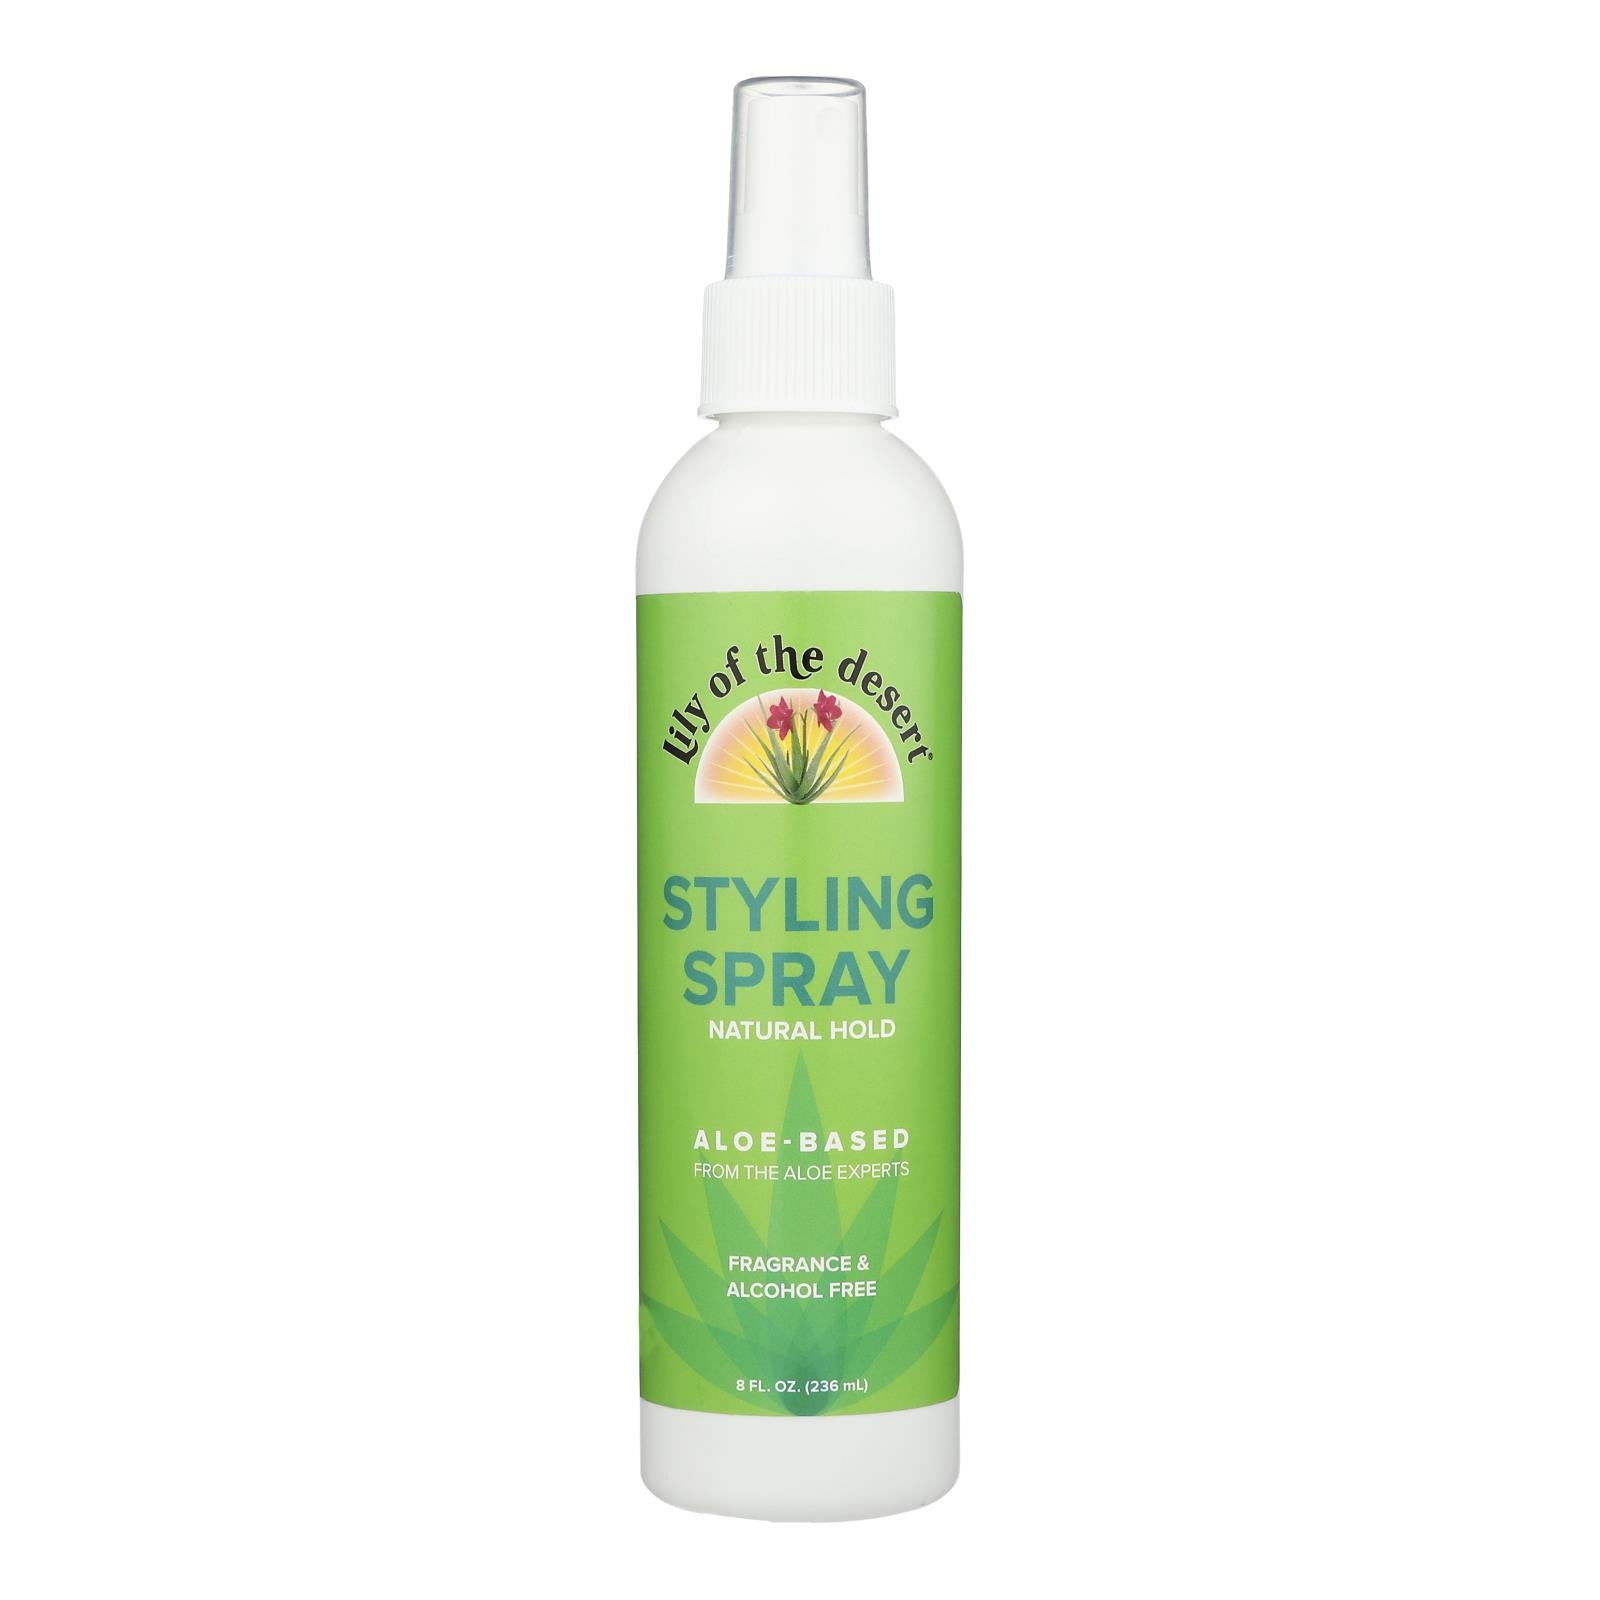 Lily Of The Desert - Styling Spray Natural Hold - Case Of 1 - 8 Fl Oz.